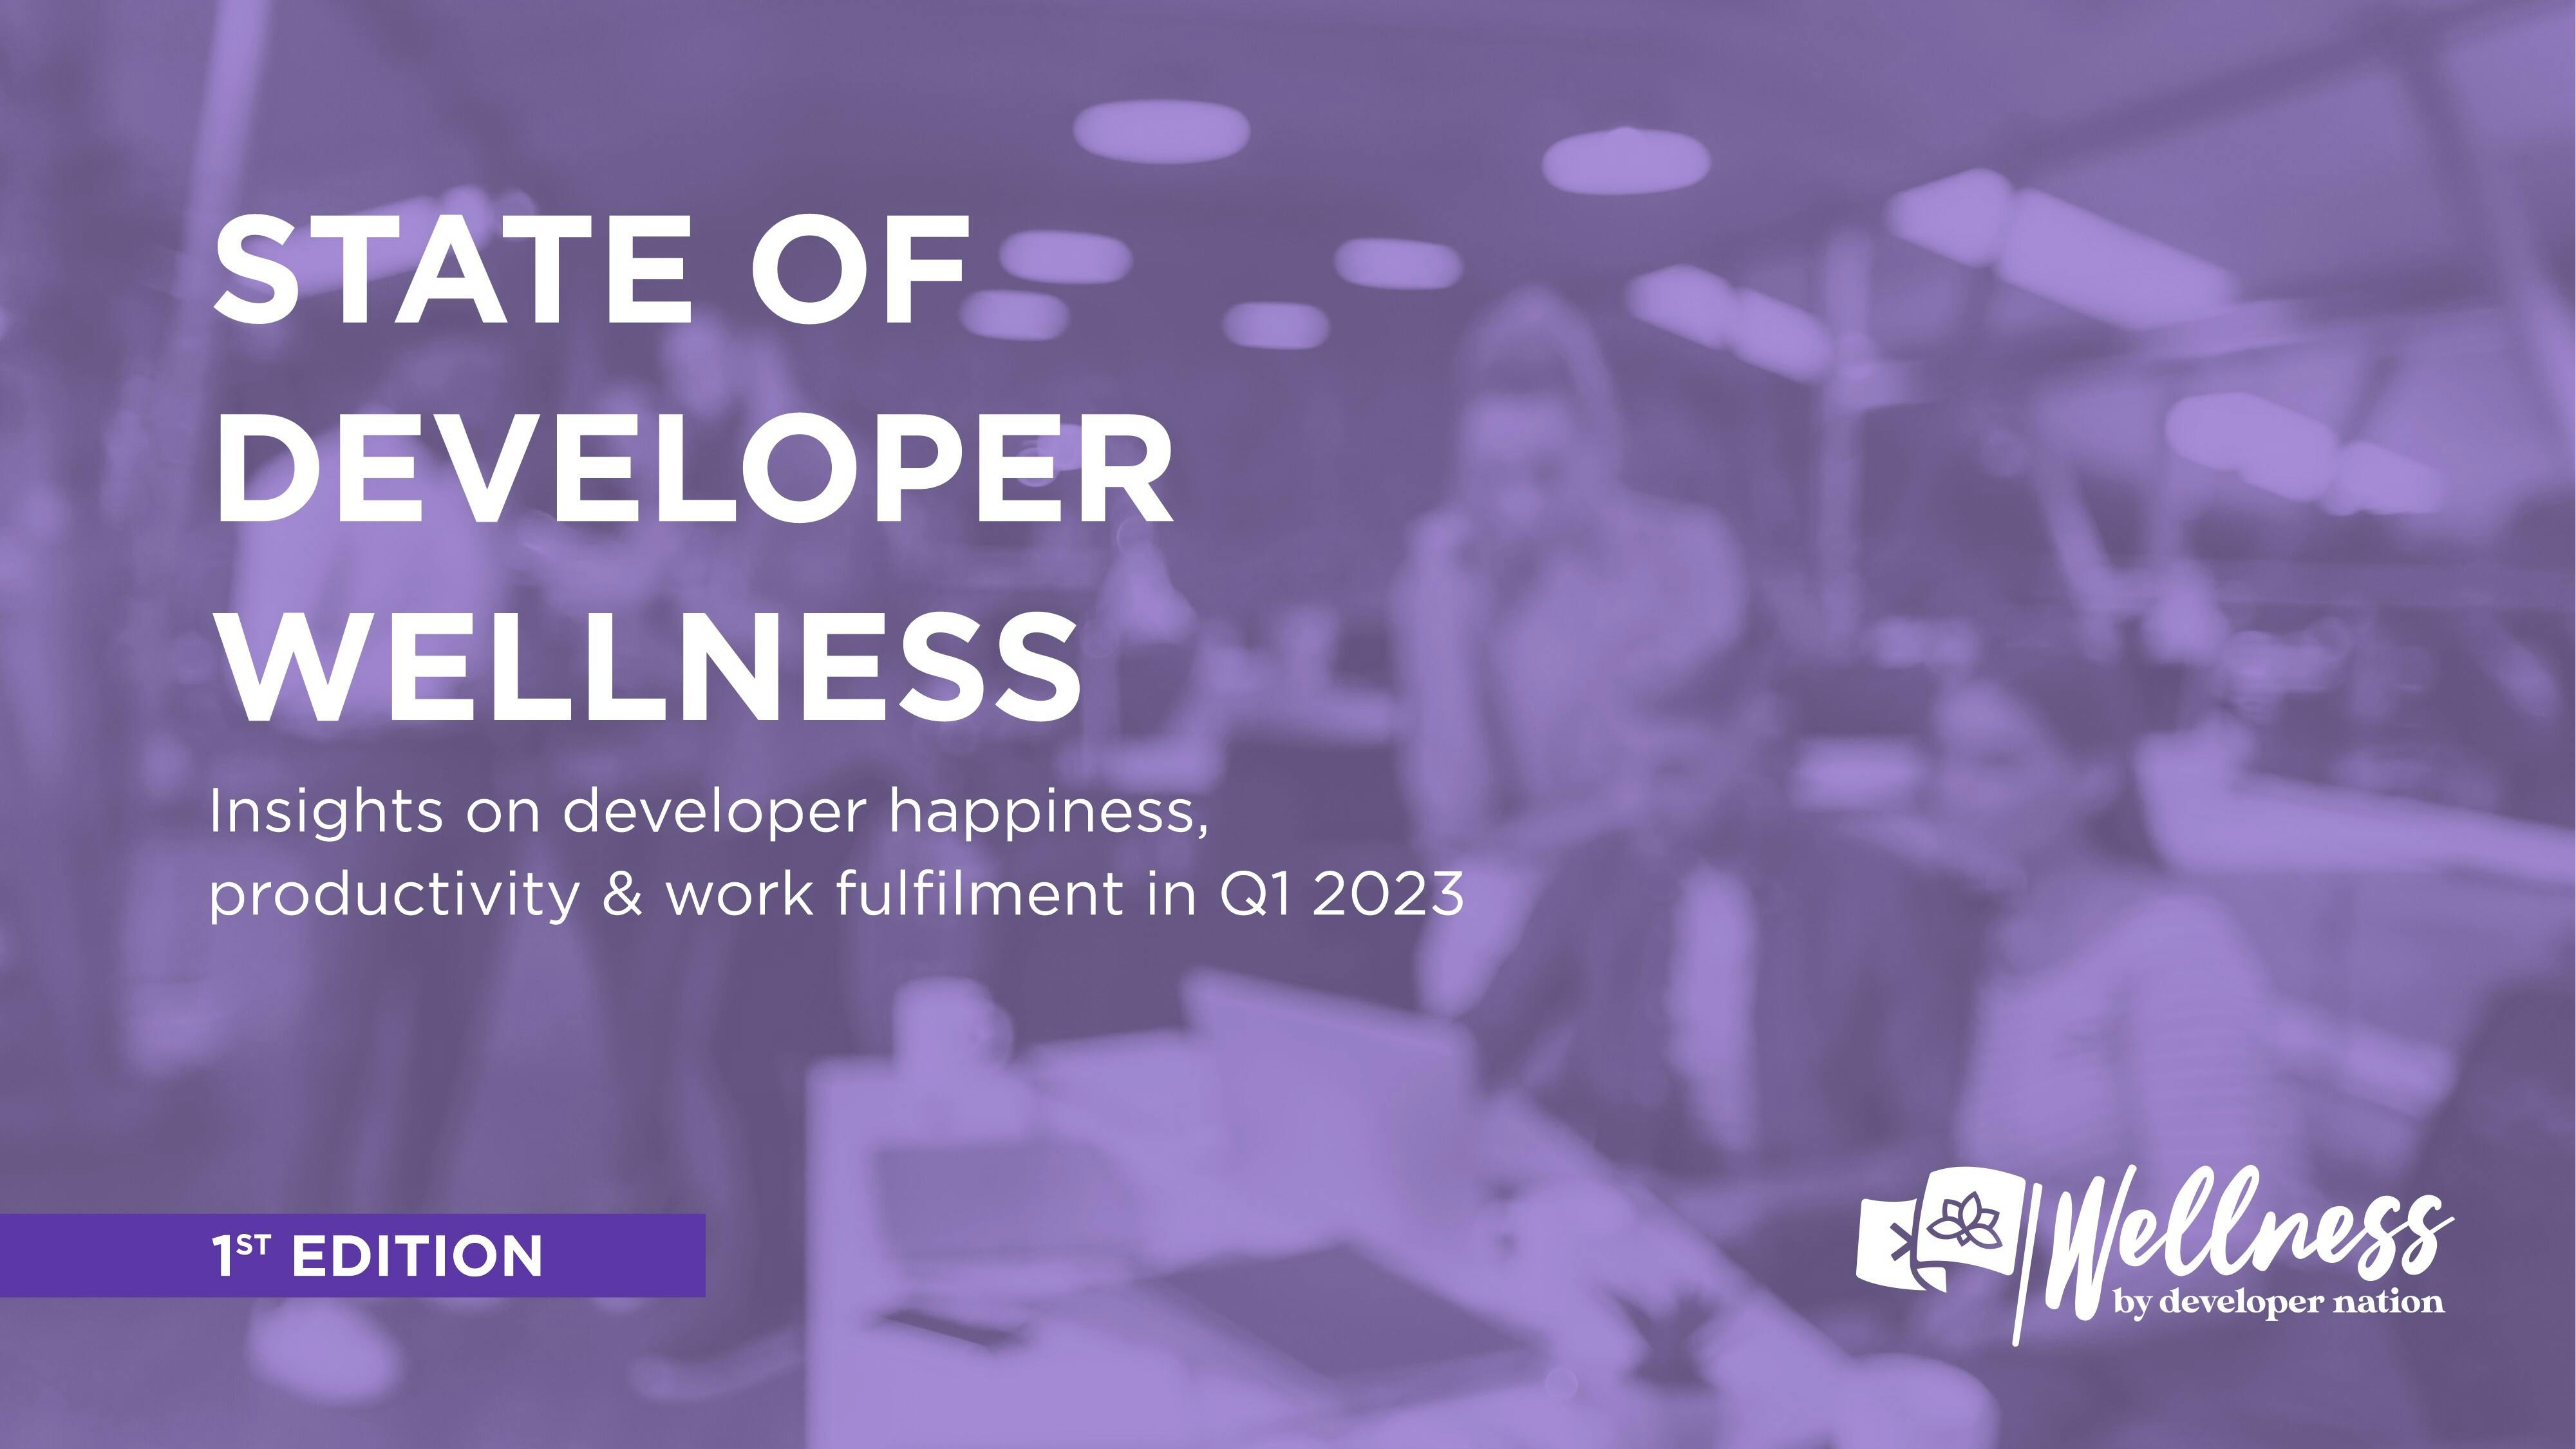 The State of Developer Wellness Report